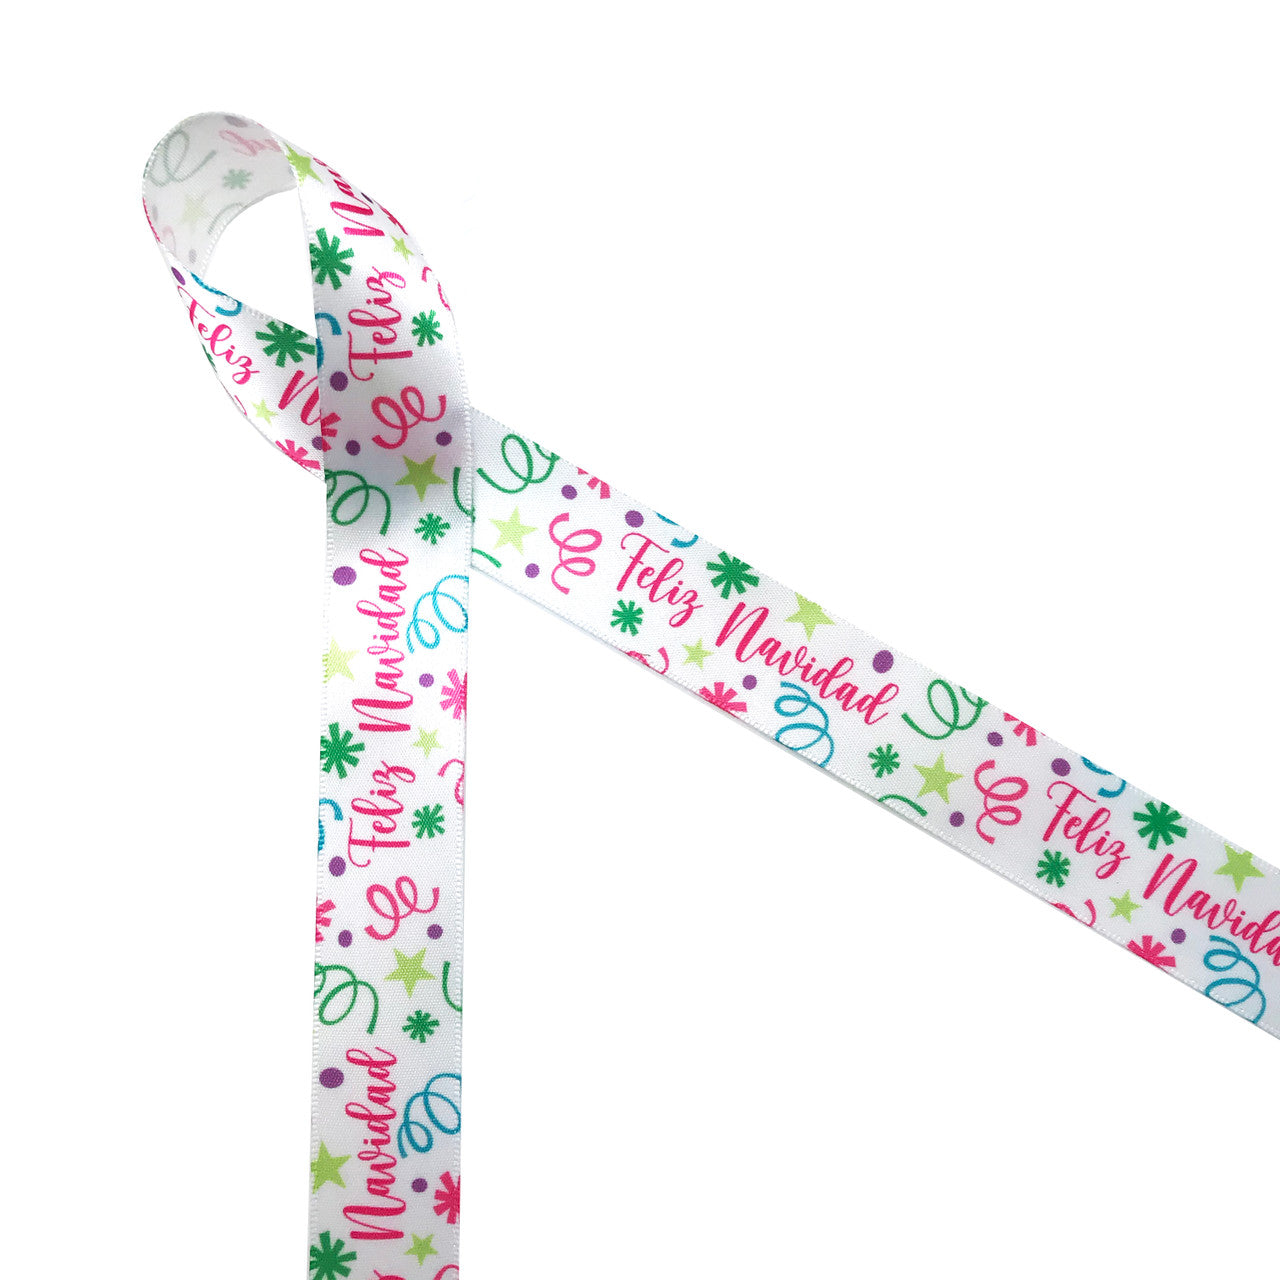 Feliz Navidad is Spanish for Merry Christmas! Our Feliz Navidad ribbon is sprinkled with colorful confetti and streamers in pink, lime green, turquoise and purple on 7/8" white single face satin. This fun, warm festive ribbon is perfect for party favors, gift wrap, table decor, wreaths and tree trim. Be sure to have this fun ribbon on hand for your Holiday decor! Our ribbon is designed and printed in the USA